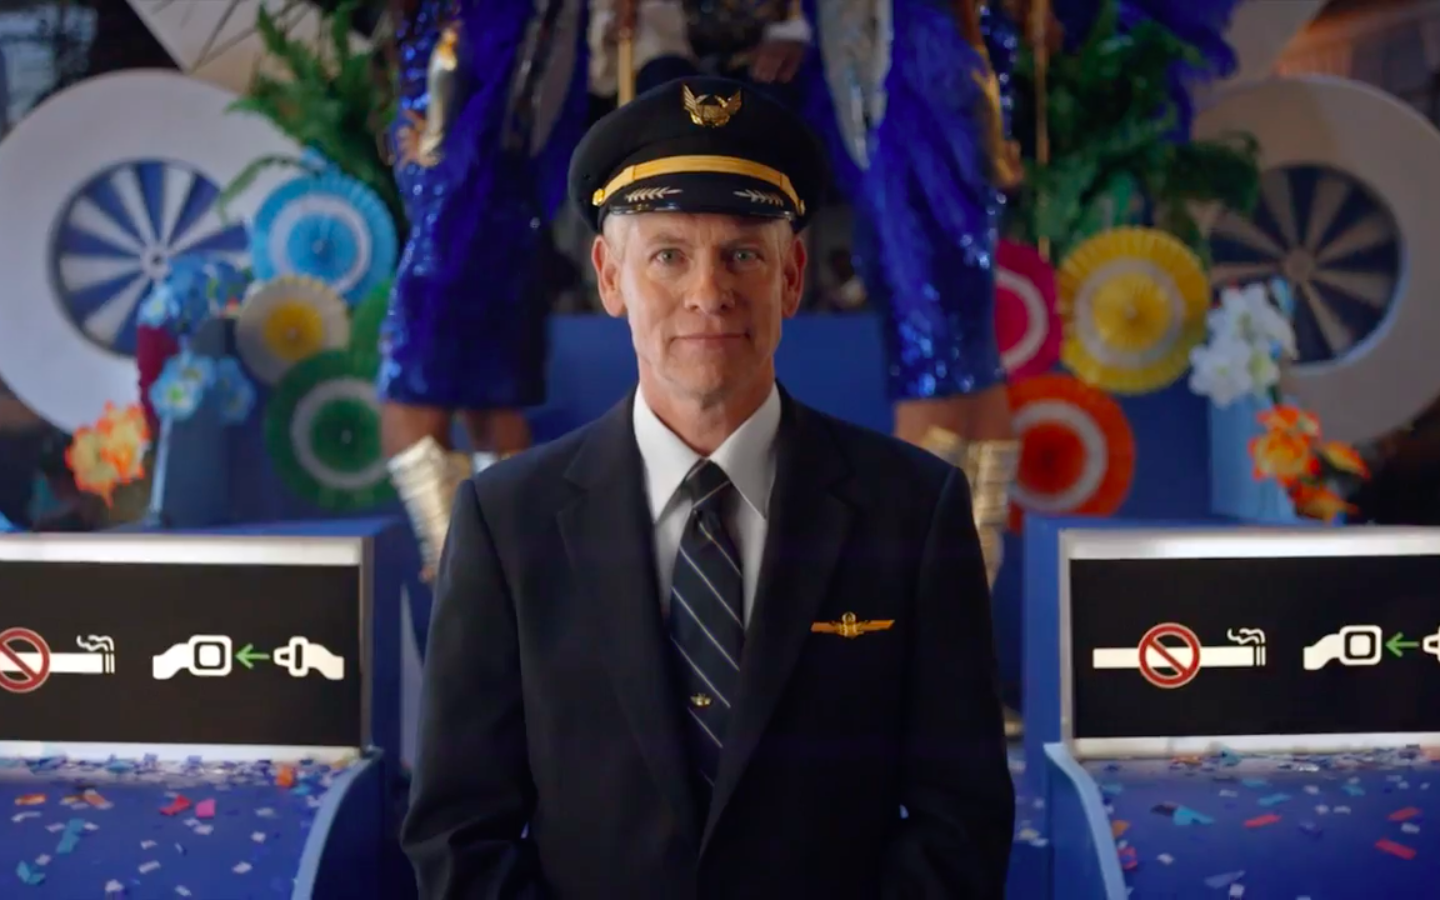 United Airlines Welcomes in a New Safety Video as It Prepares to Bid Farewell to its Last 747 Queen of the Skies